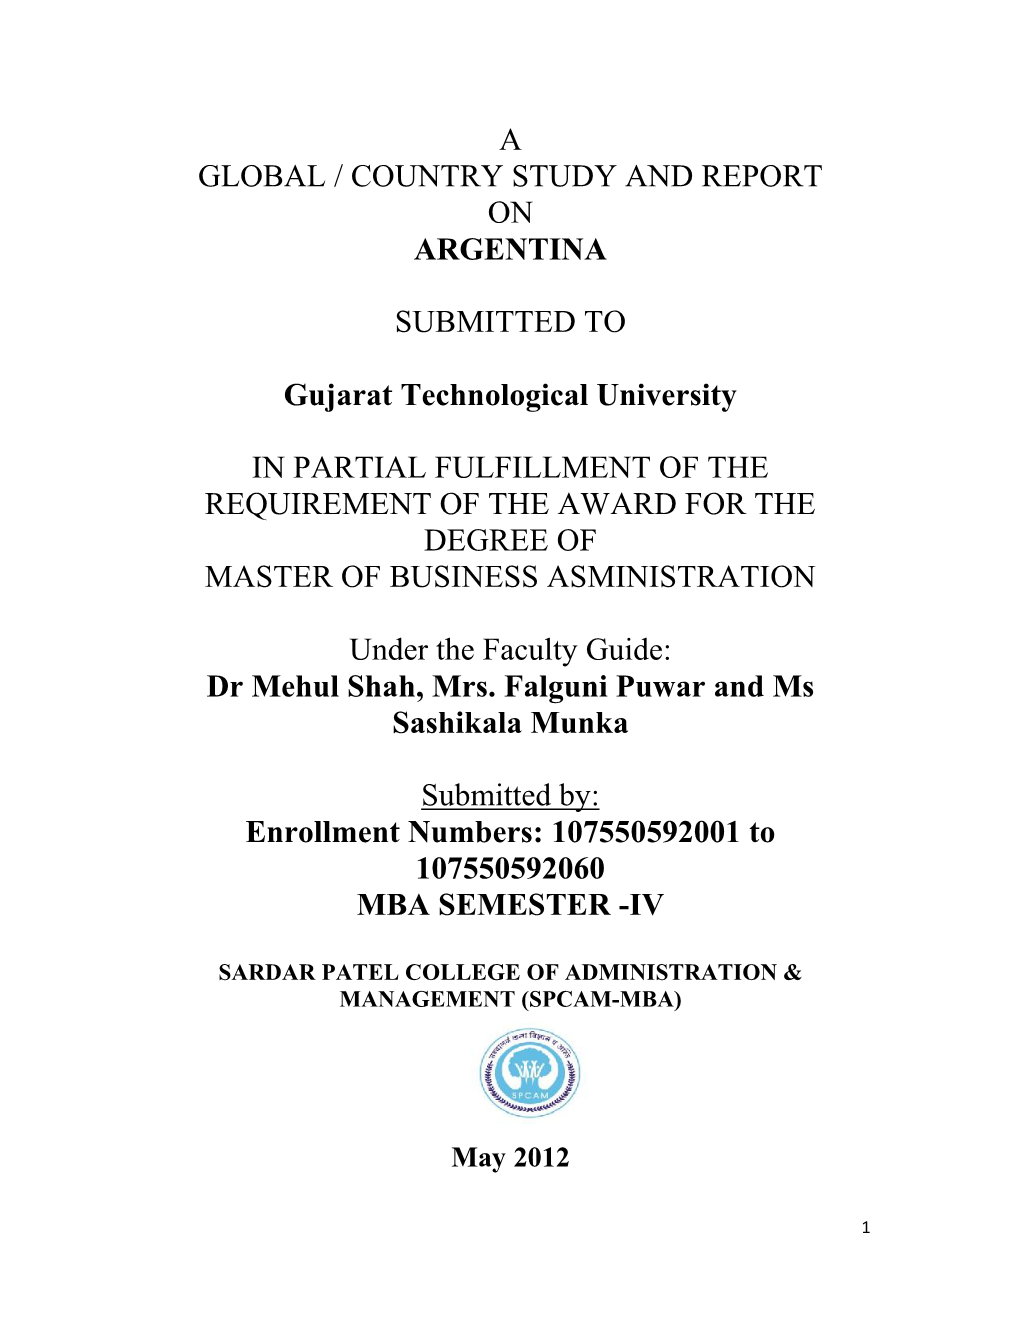 A Global / Country Study and Report on Argentina